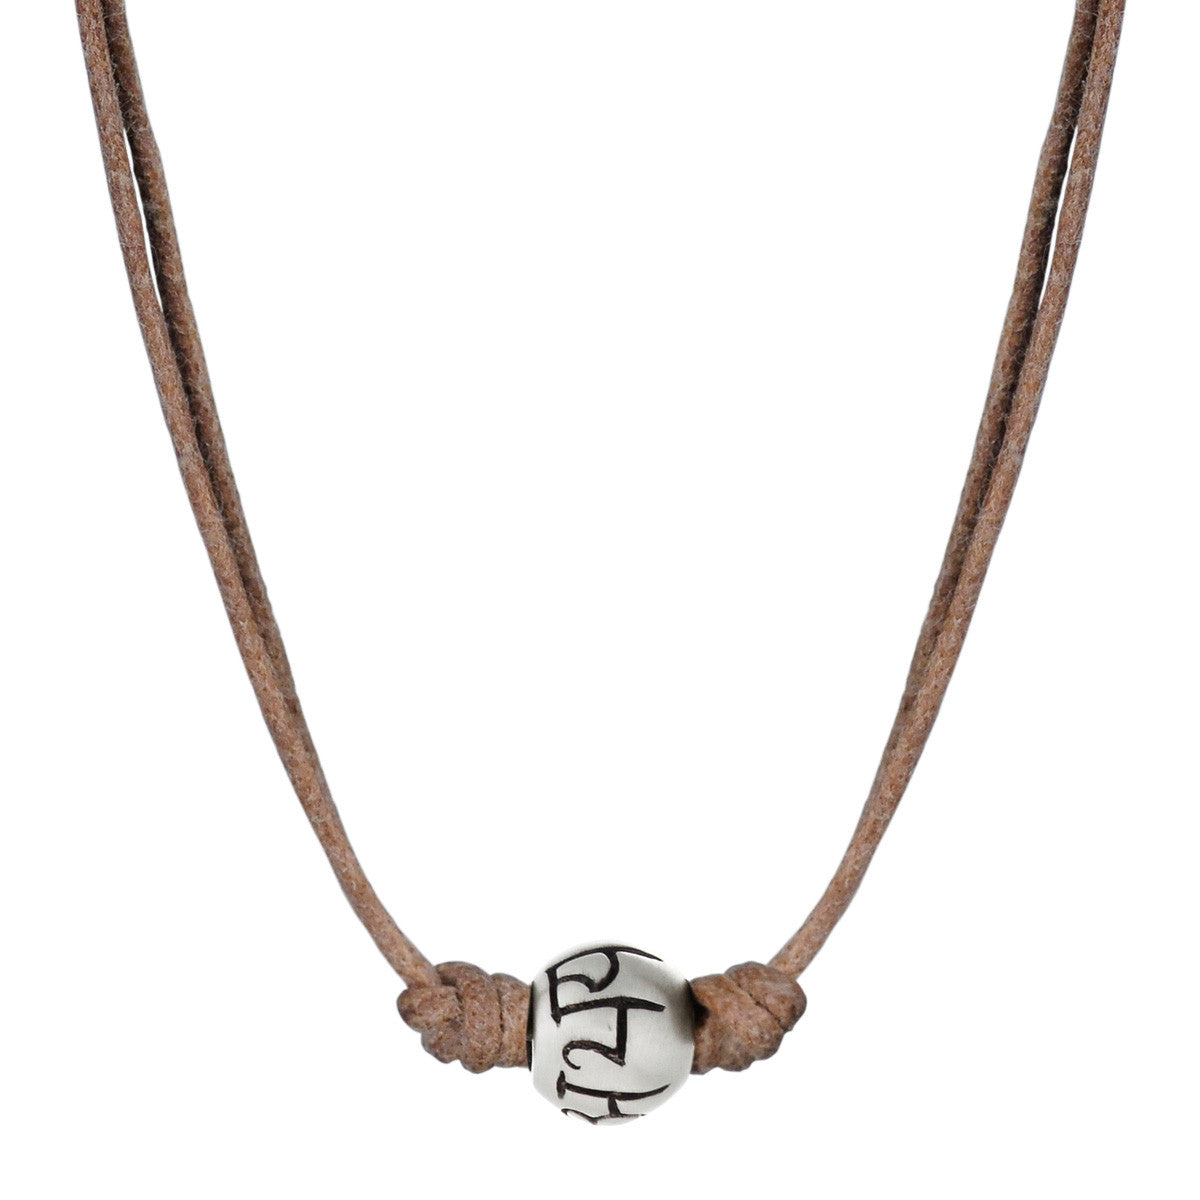 Men's Sterling Silver 'Fearlessness' Bead Necklace on Natural Cord